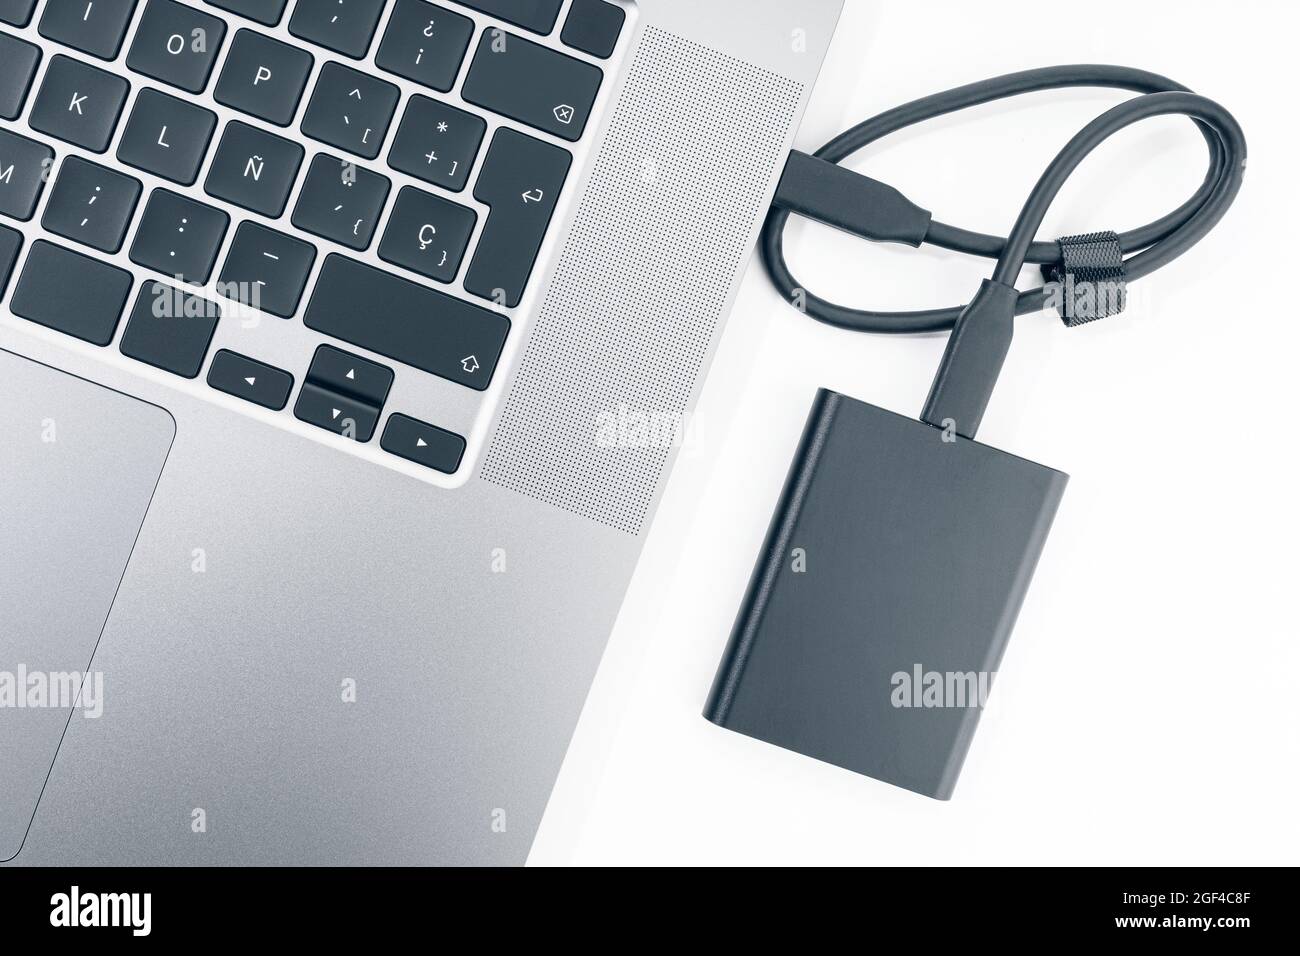 External hard disk connected to a modern laptop computer. Top view Stock Photo